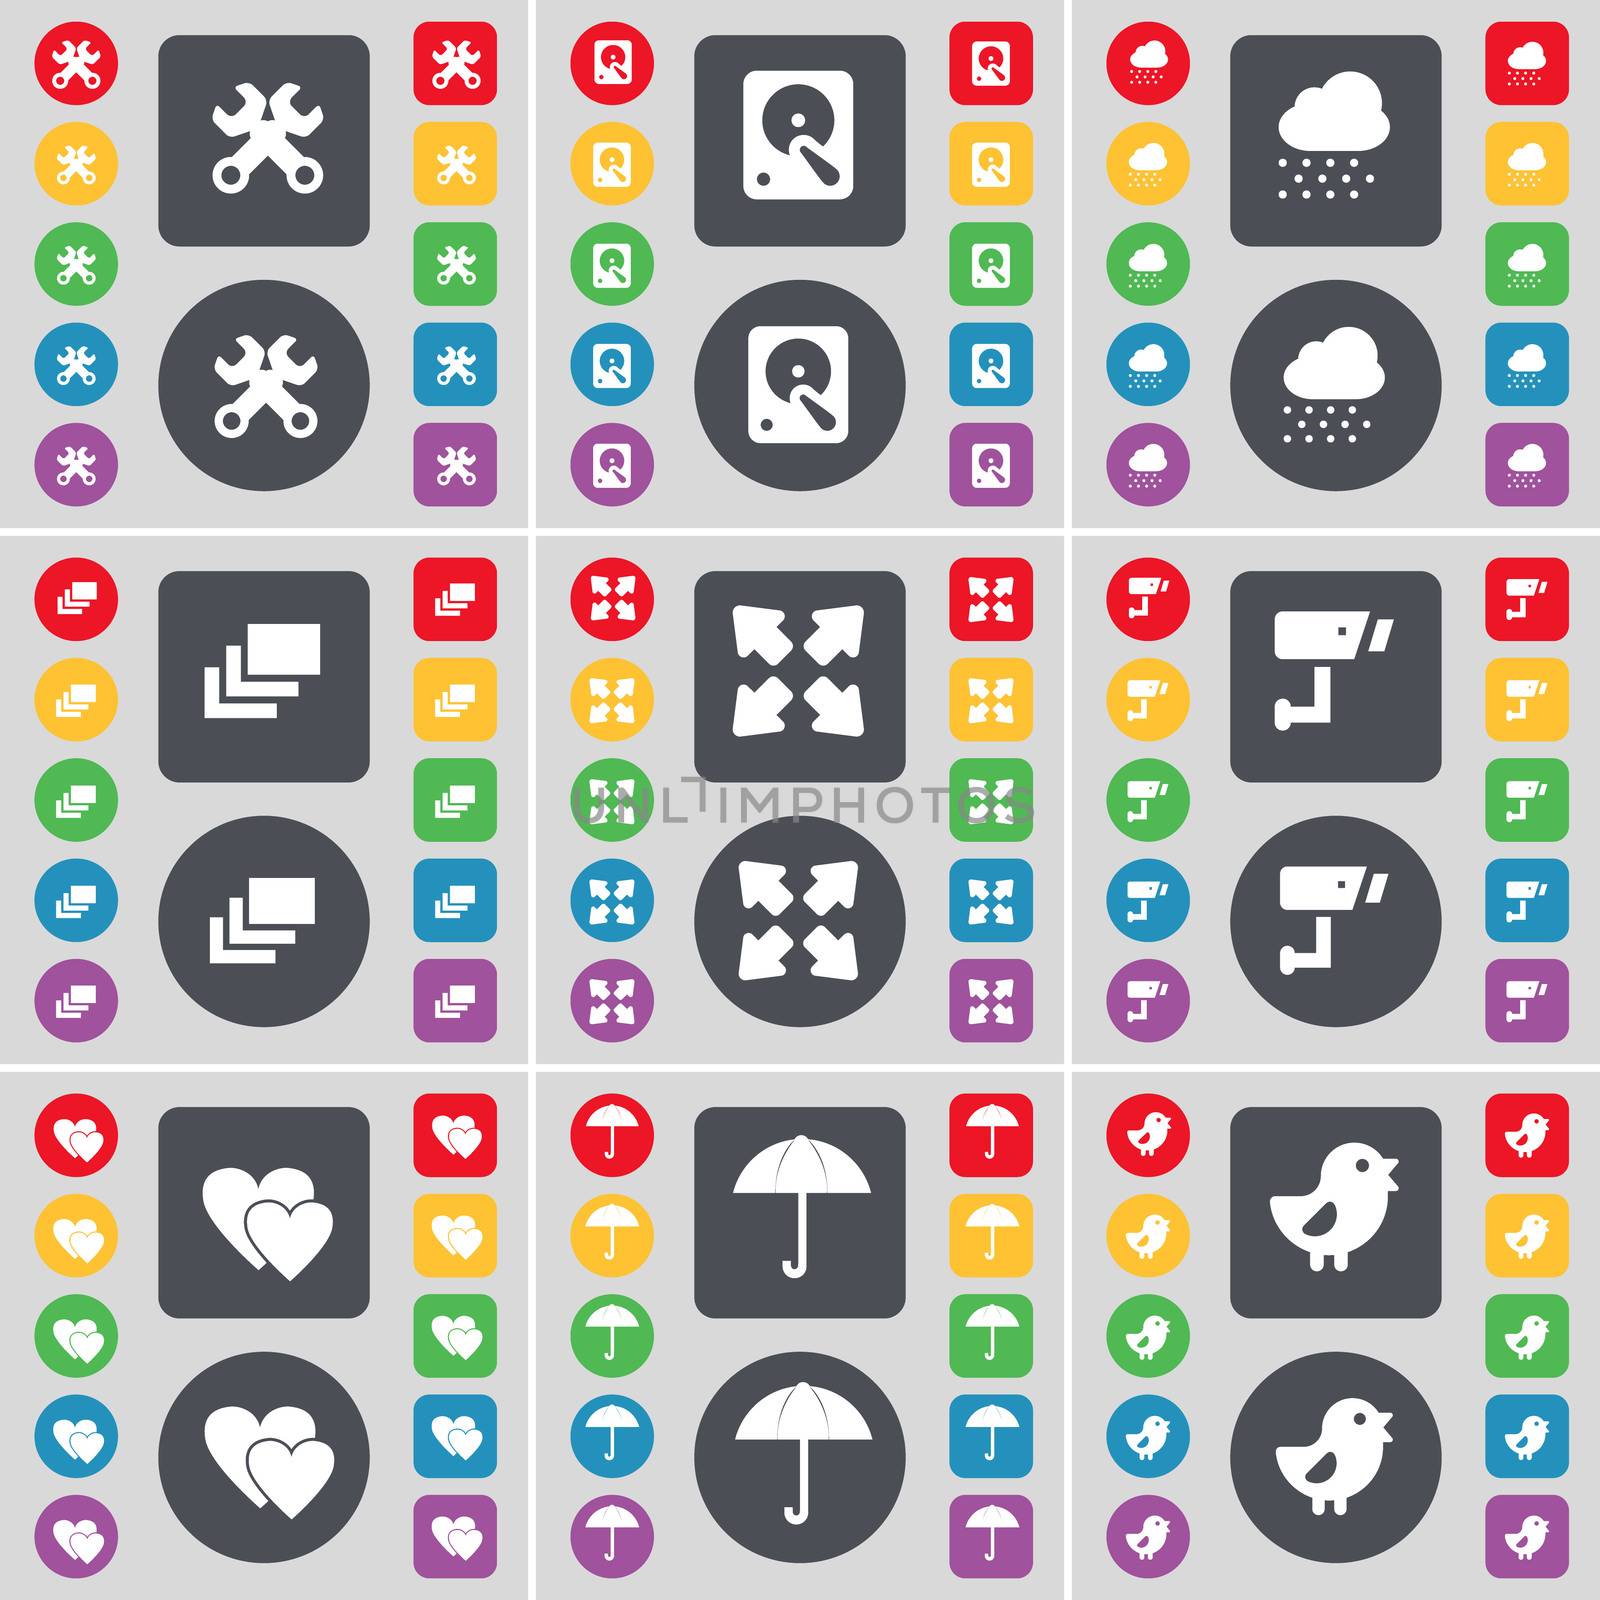 Wrench, Hard drive, Cloud, Gallery, Full screen, CCTV, Heart, Umbrella, Bird icon symbol. A large set of flat, colored buttons for your design.  by serhii_lohvyniuk